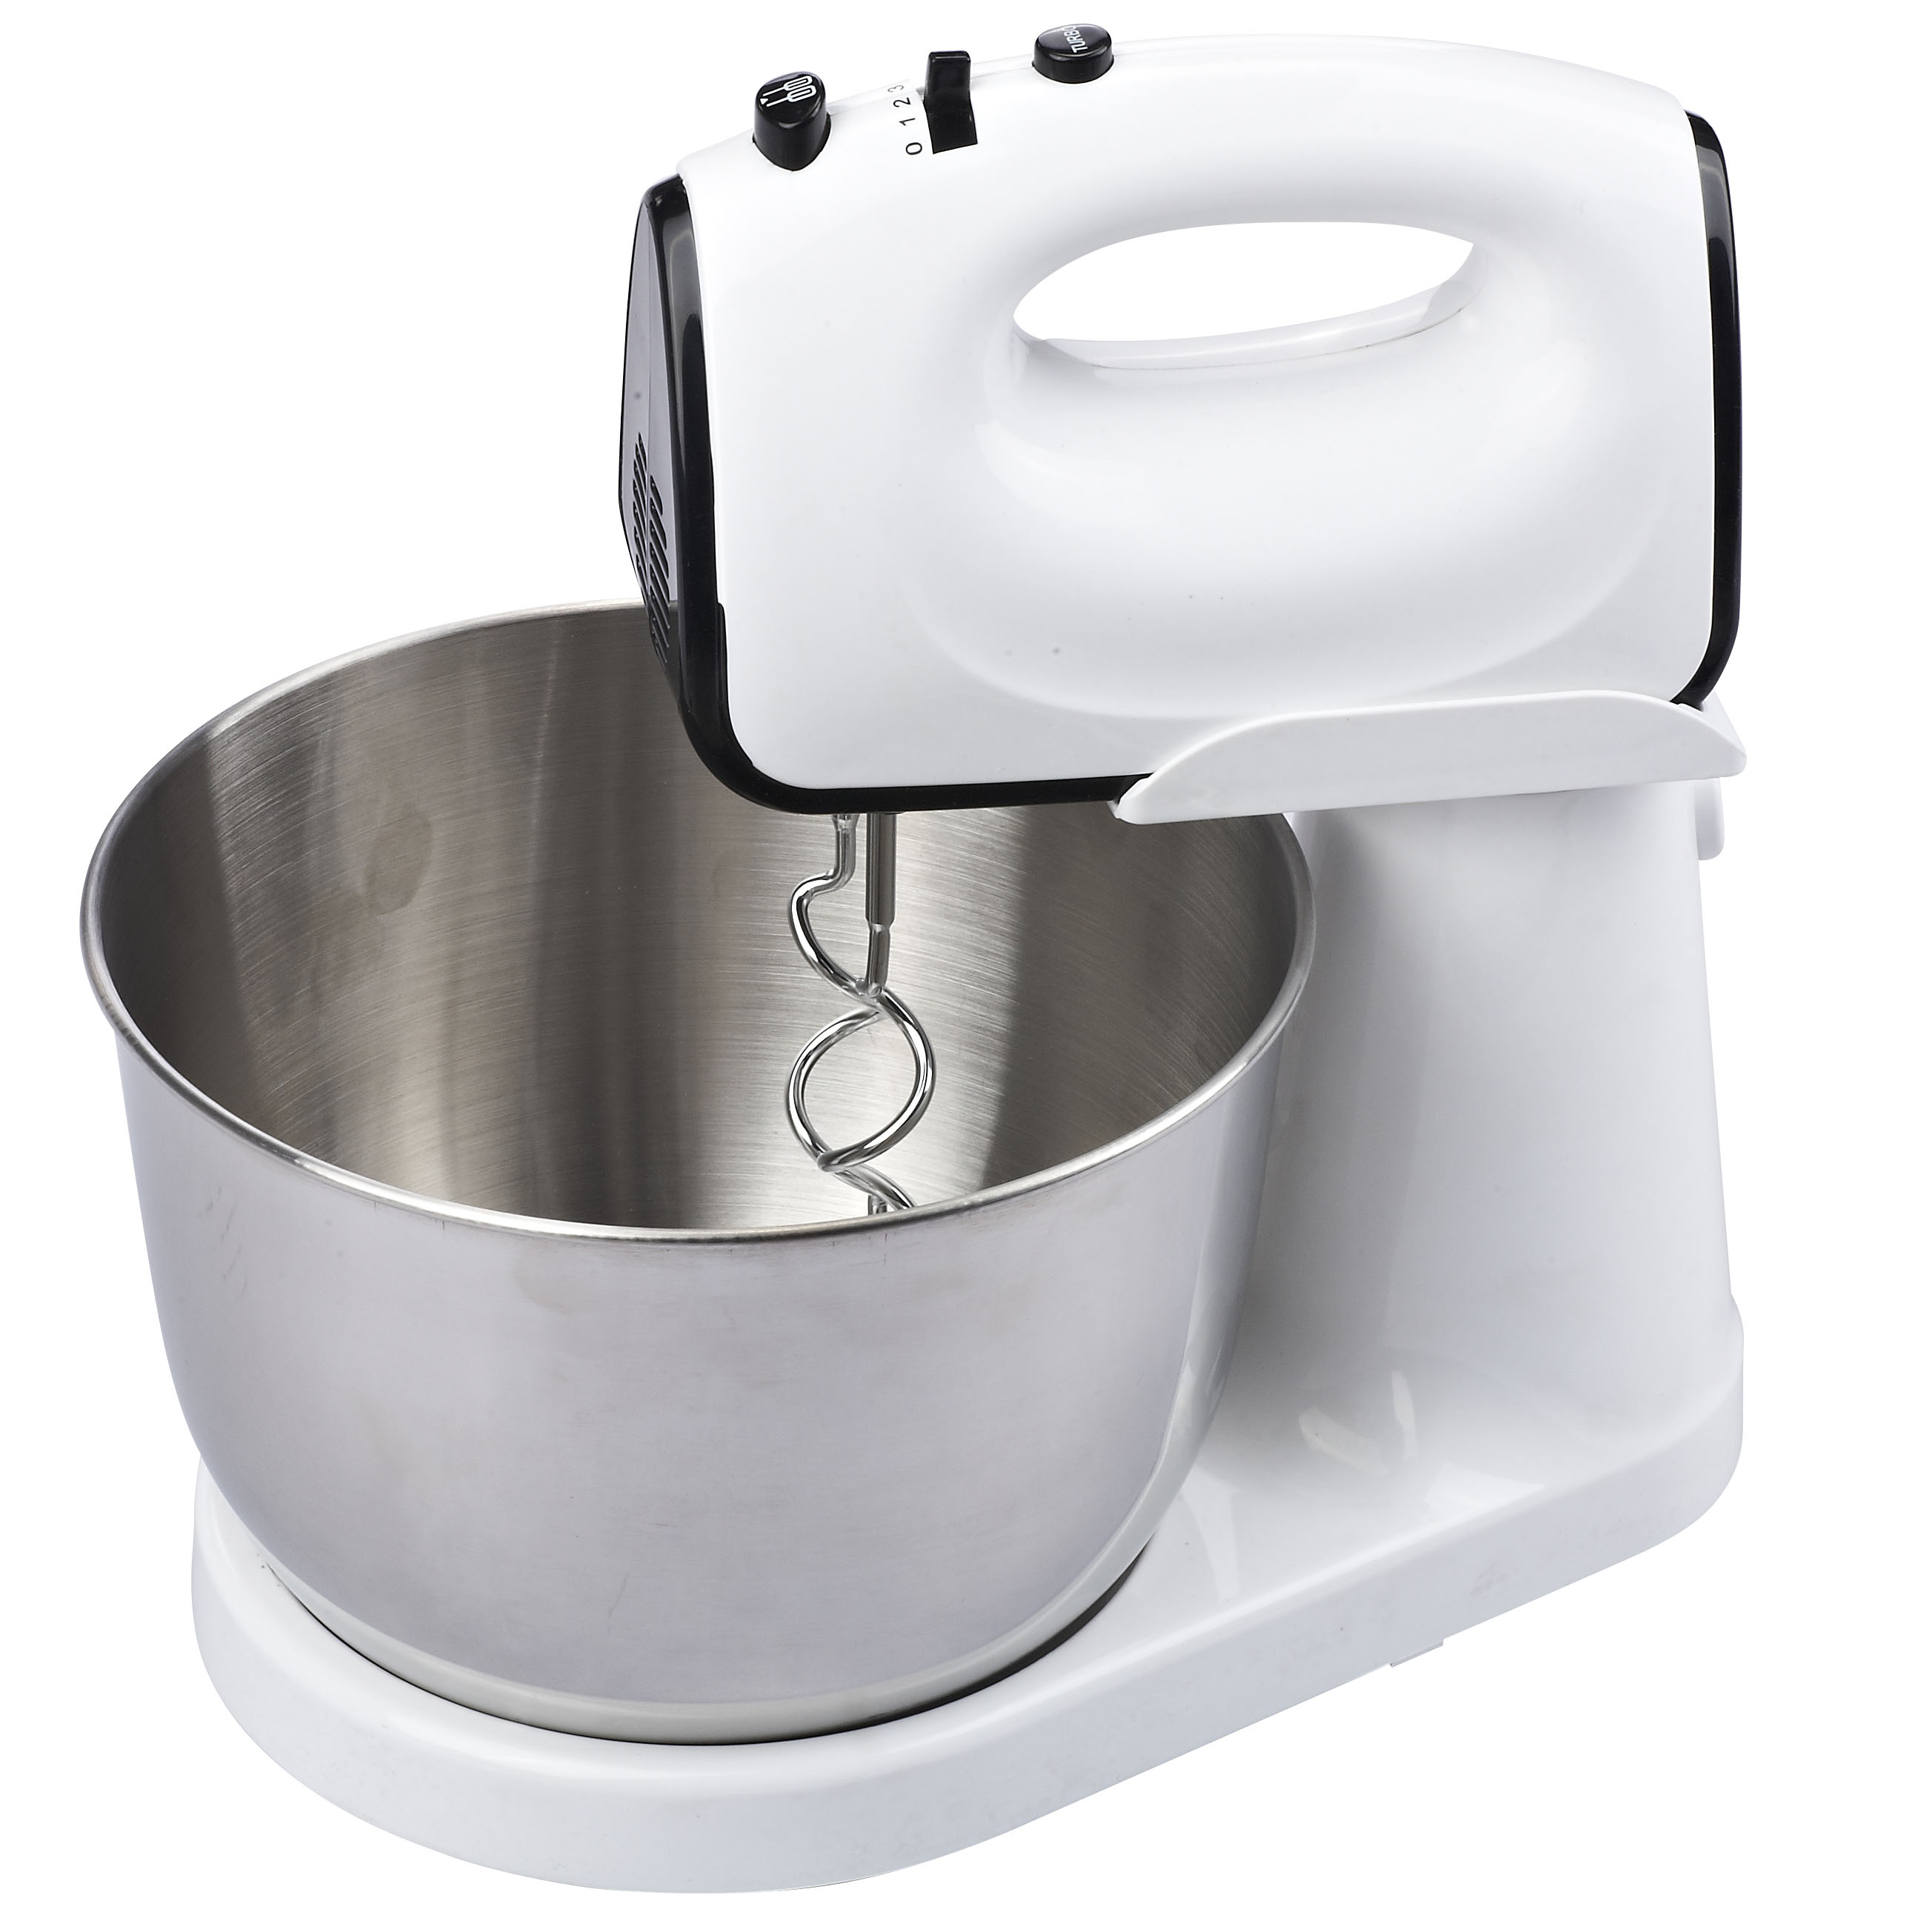 HM-1541 Hand Mixer with bowl